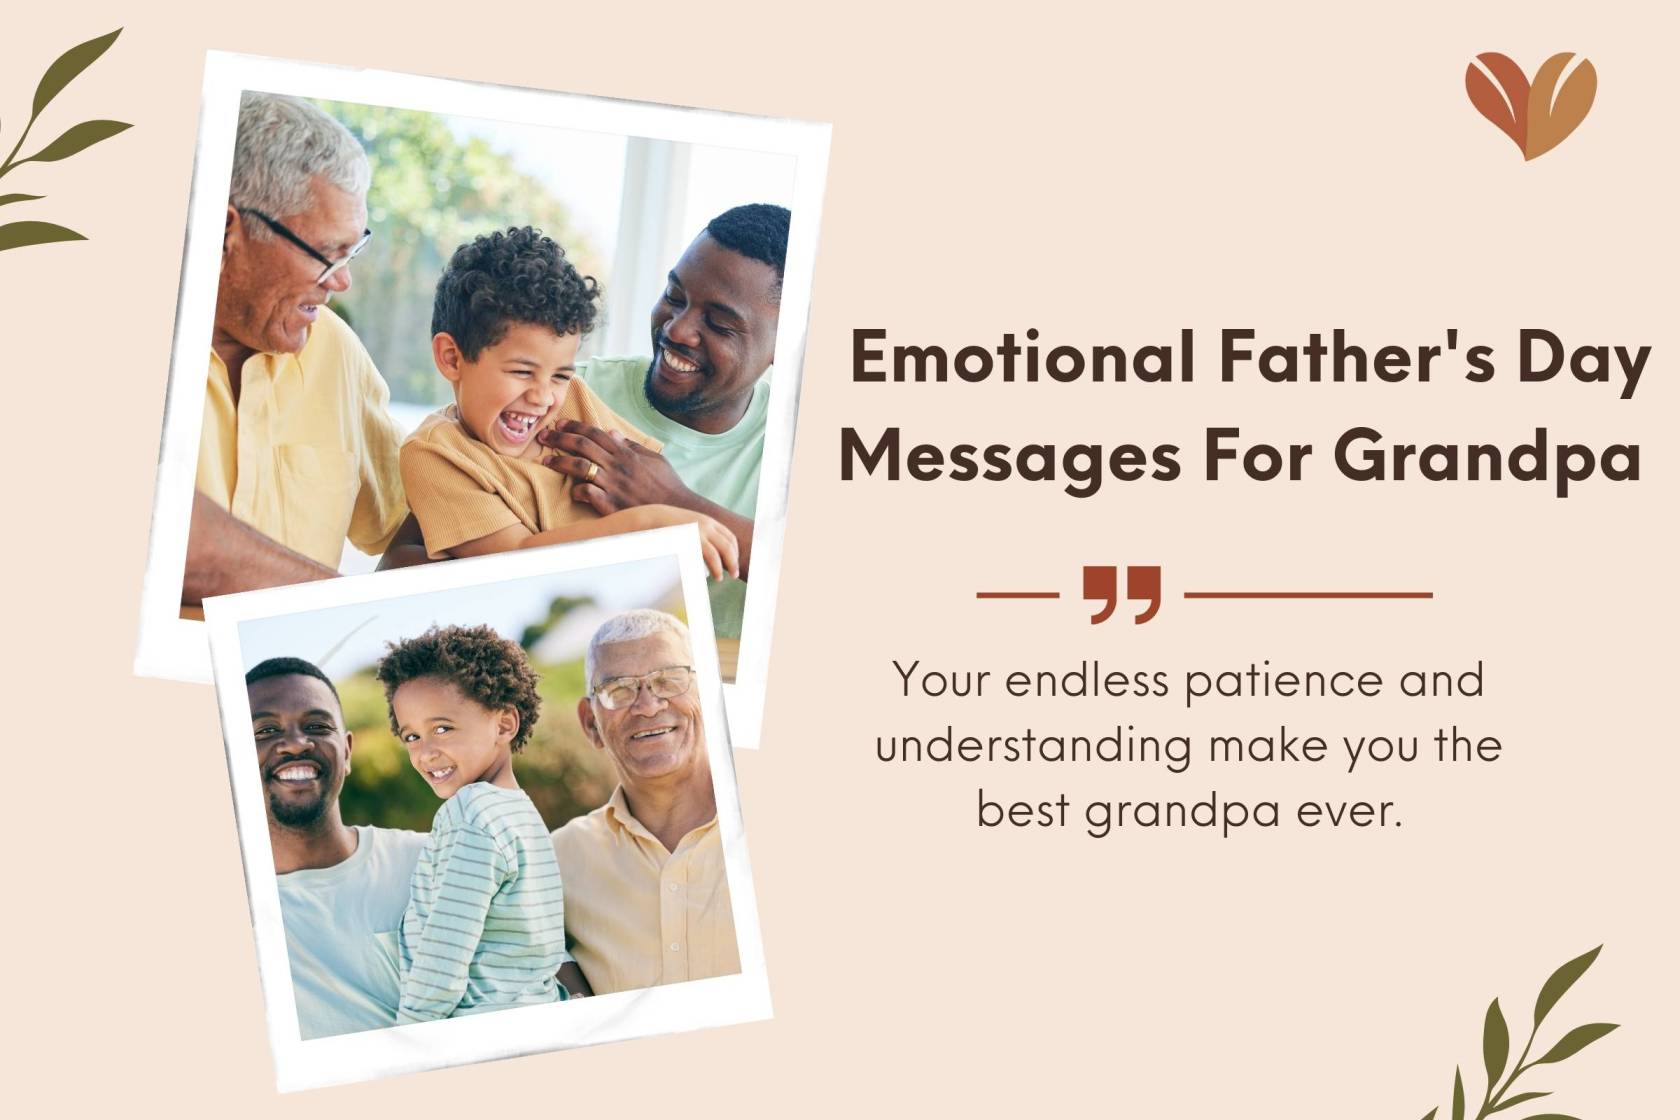 Emotional Father's Day Messages For Grandpa